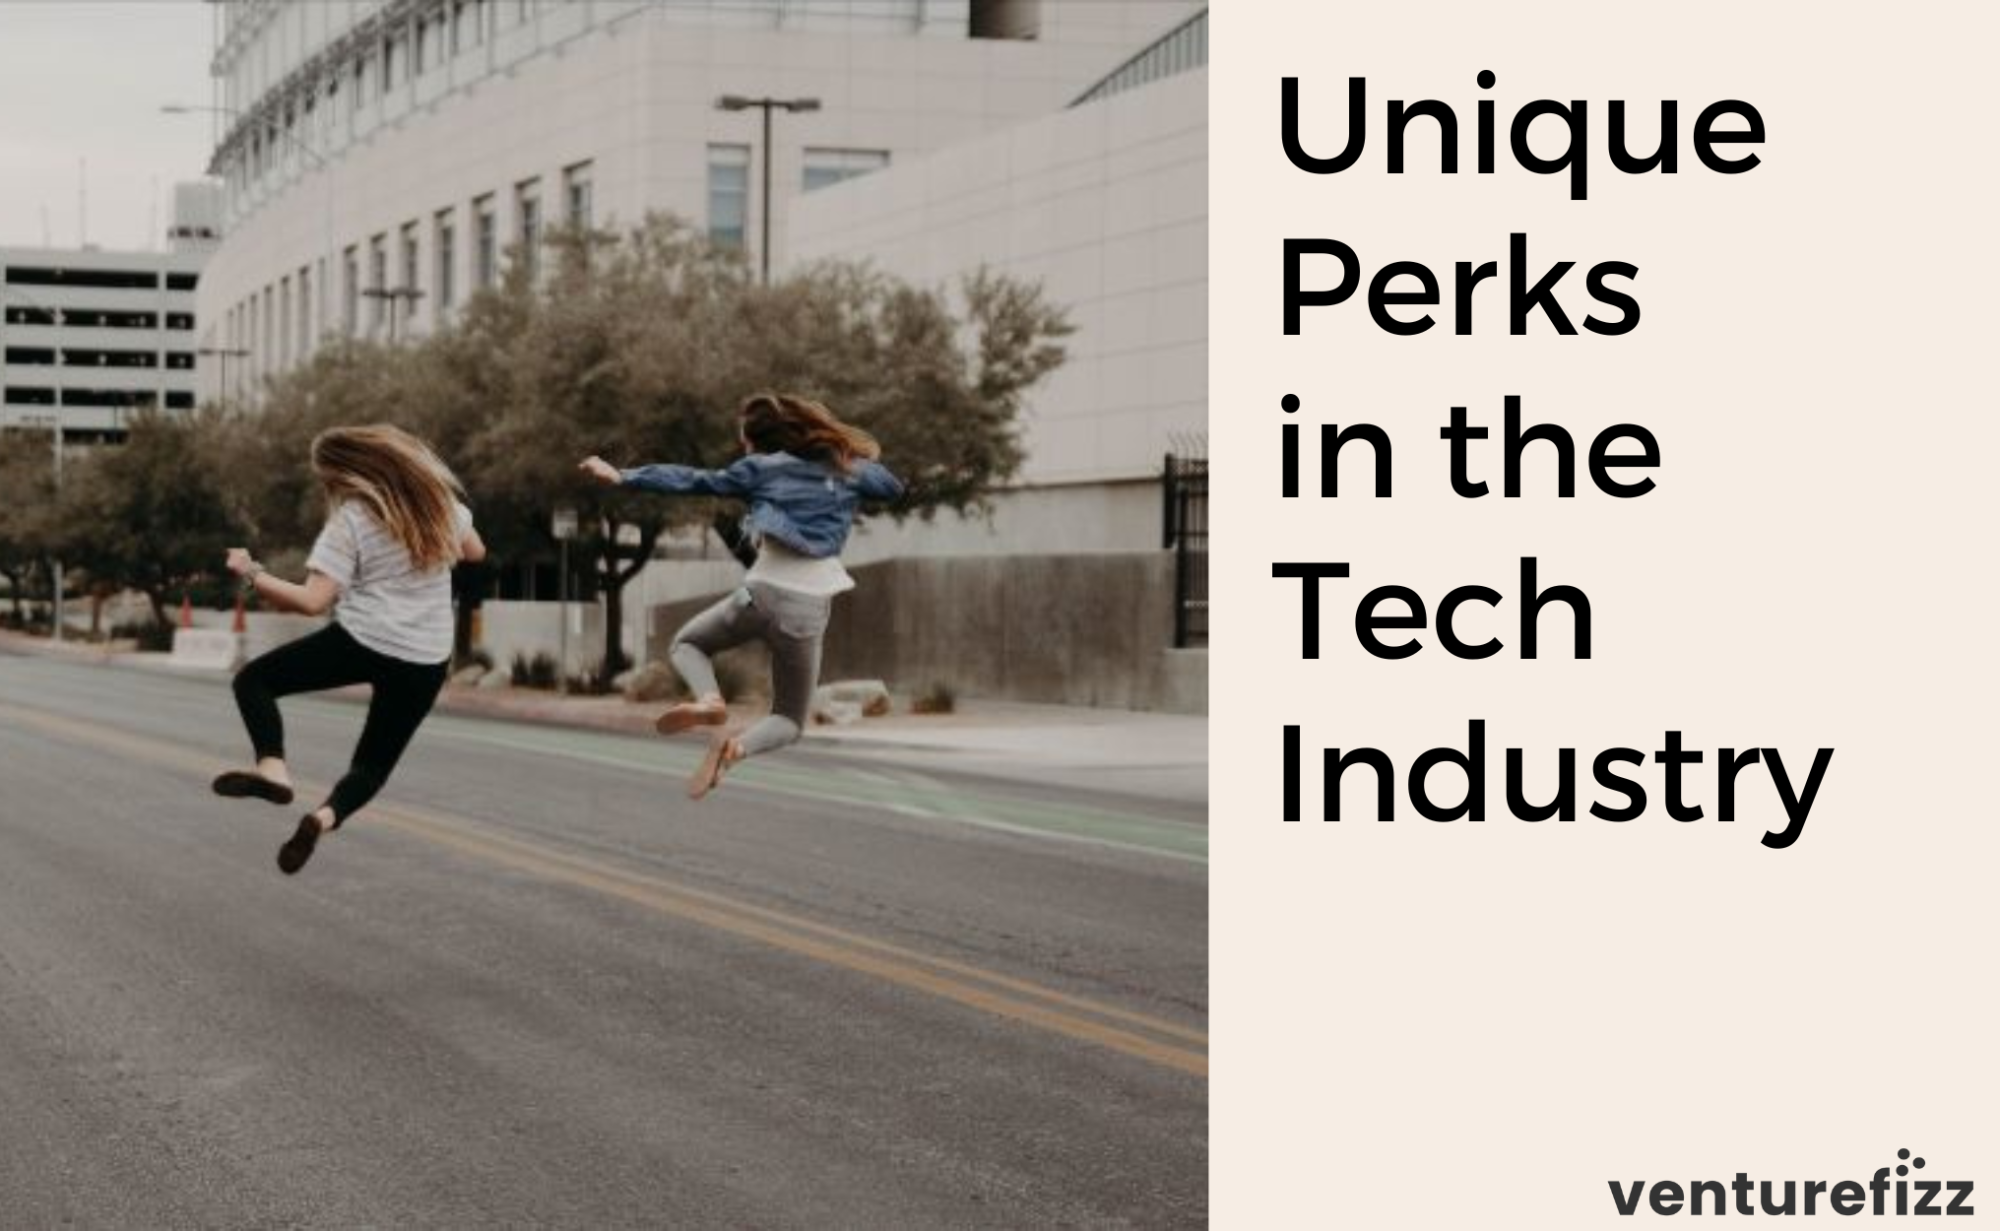 Unique Perks in the Tech Industry banner image